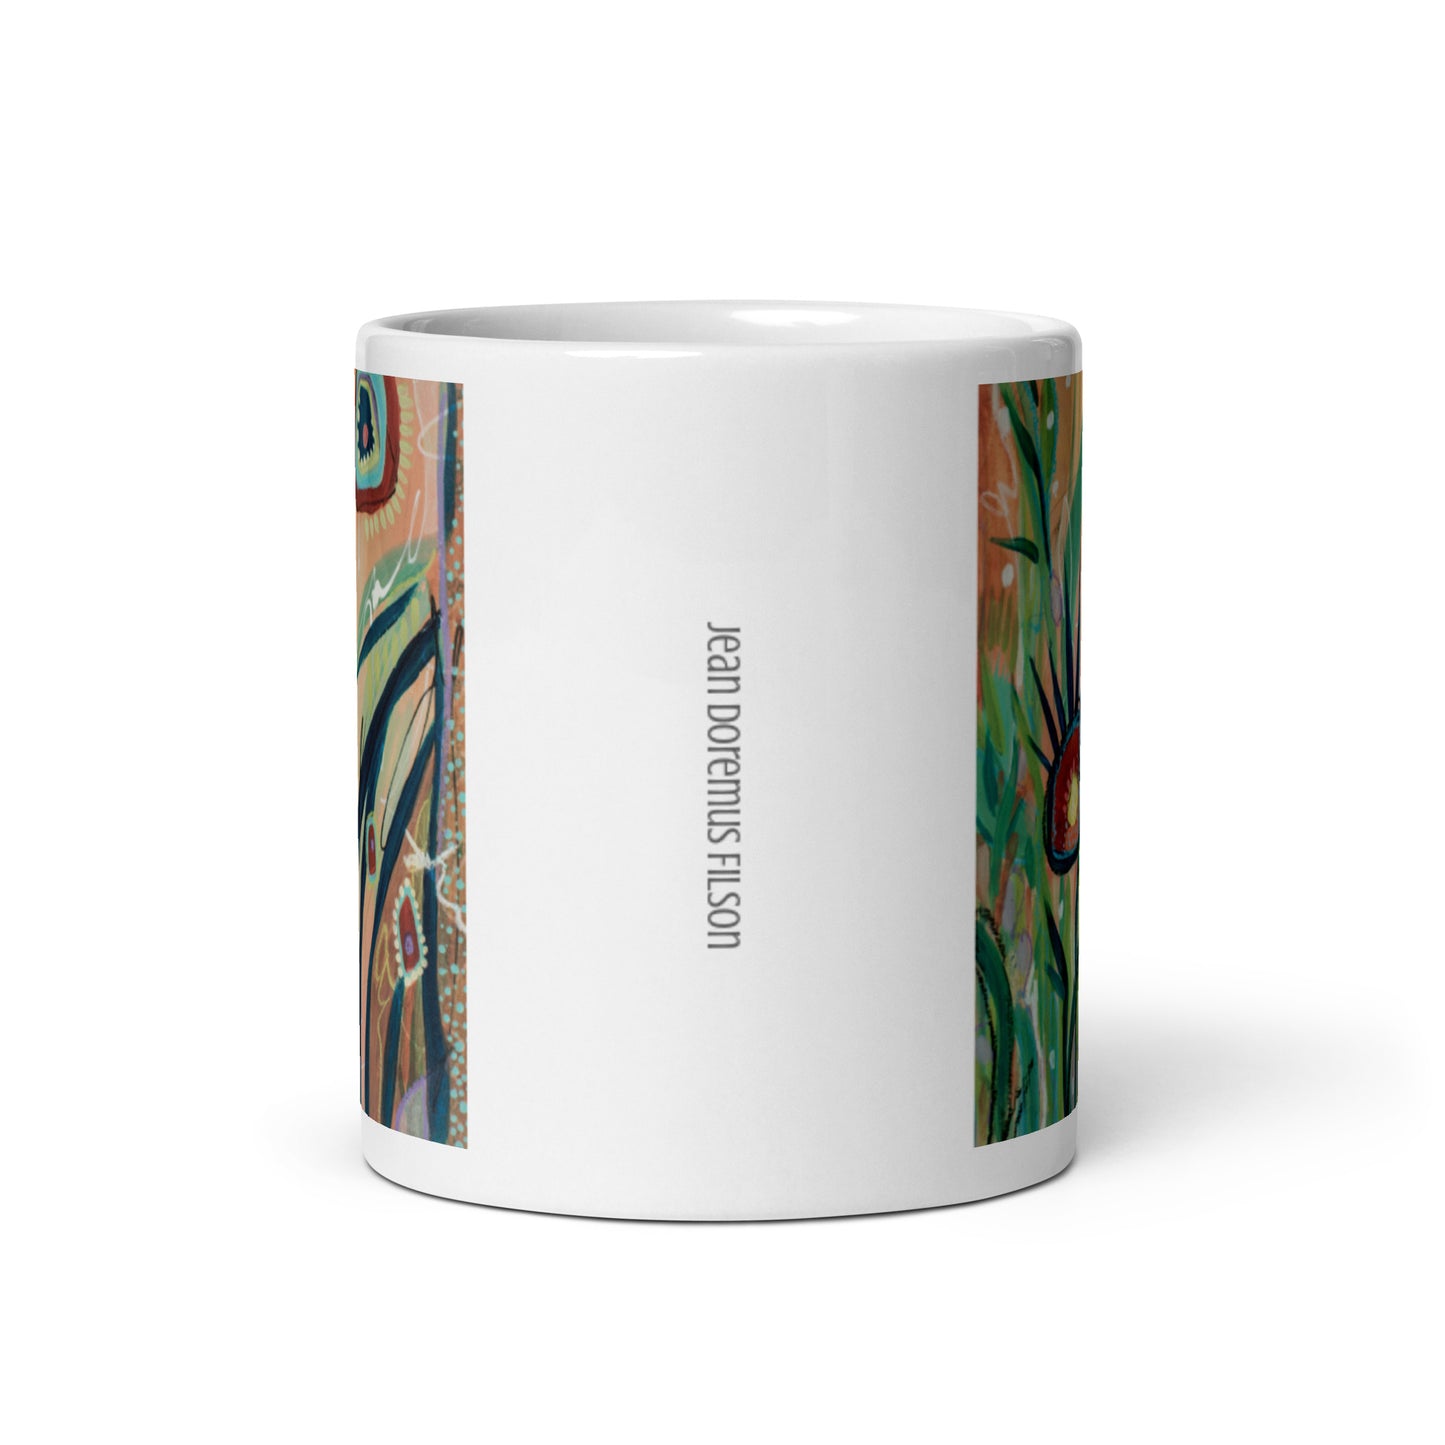 Footsteps in the distance, White glossy mug